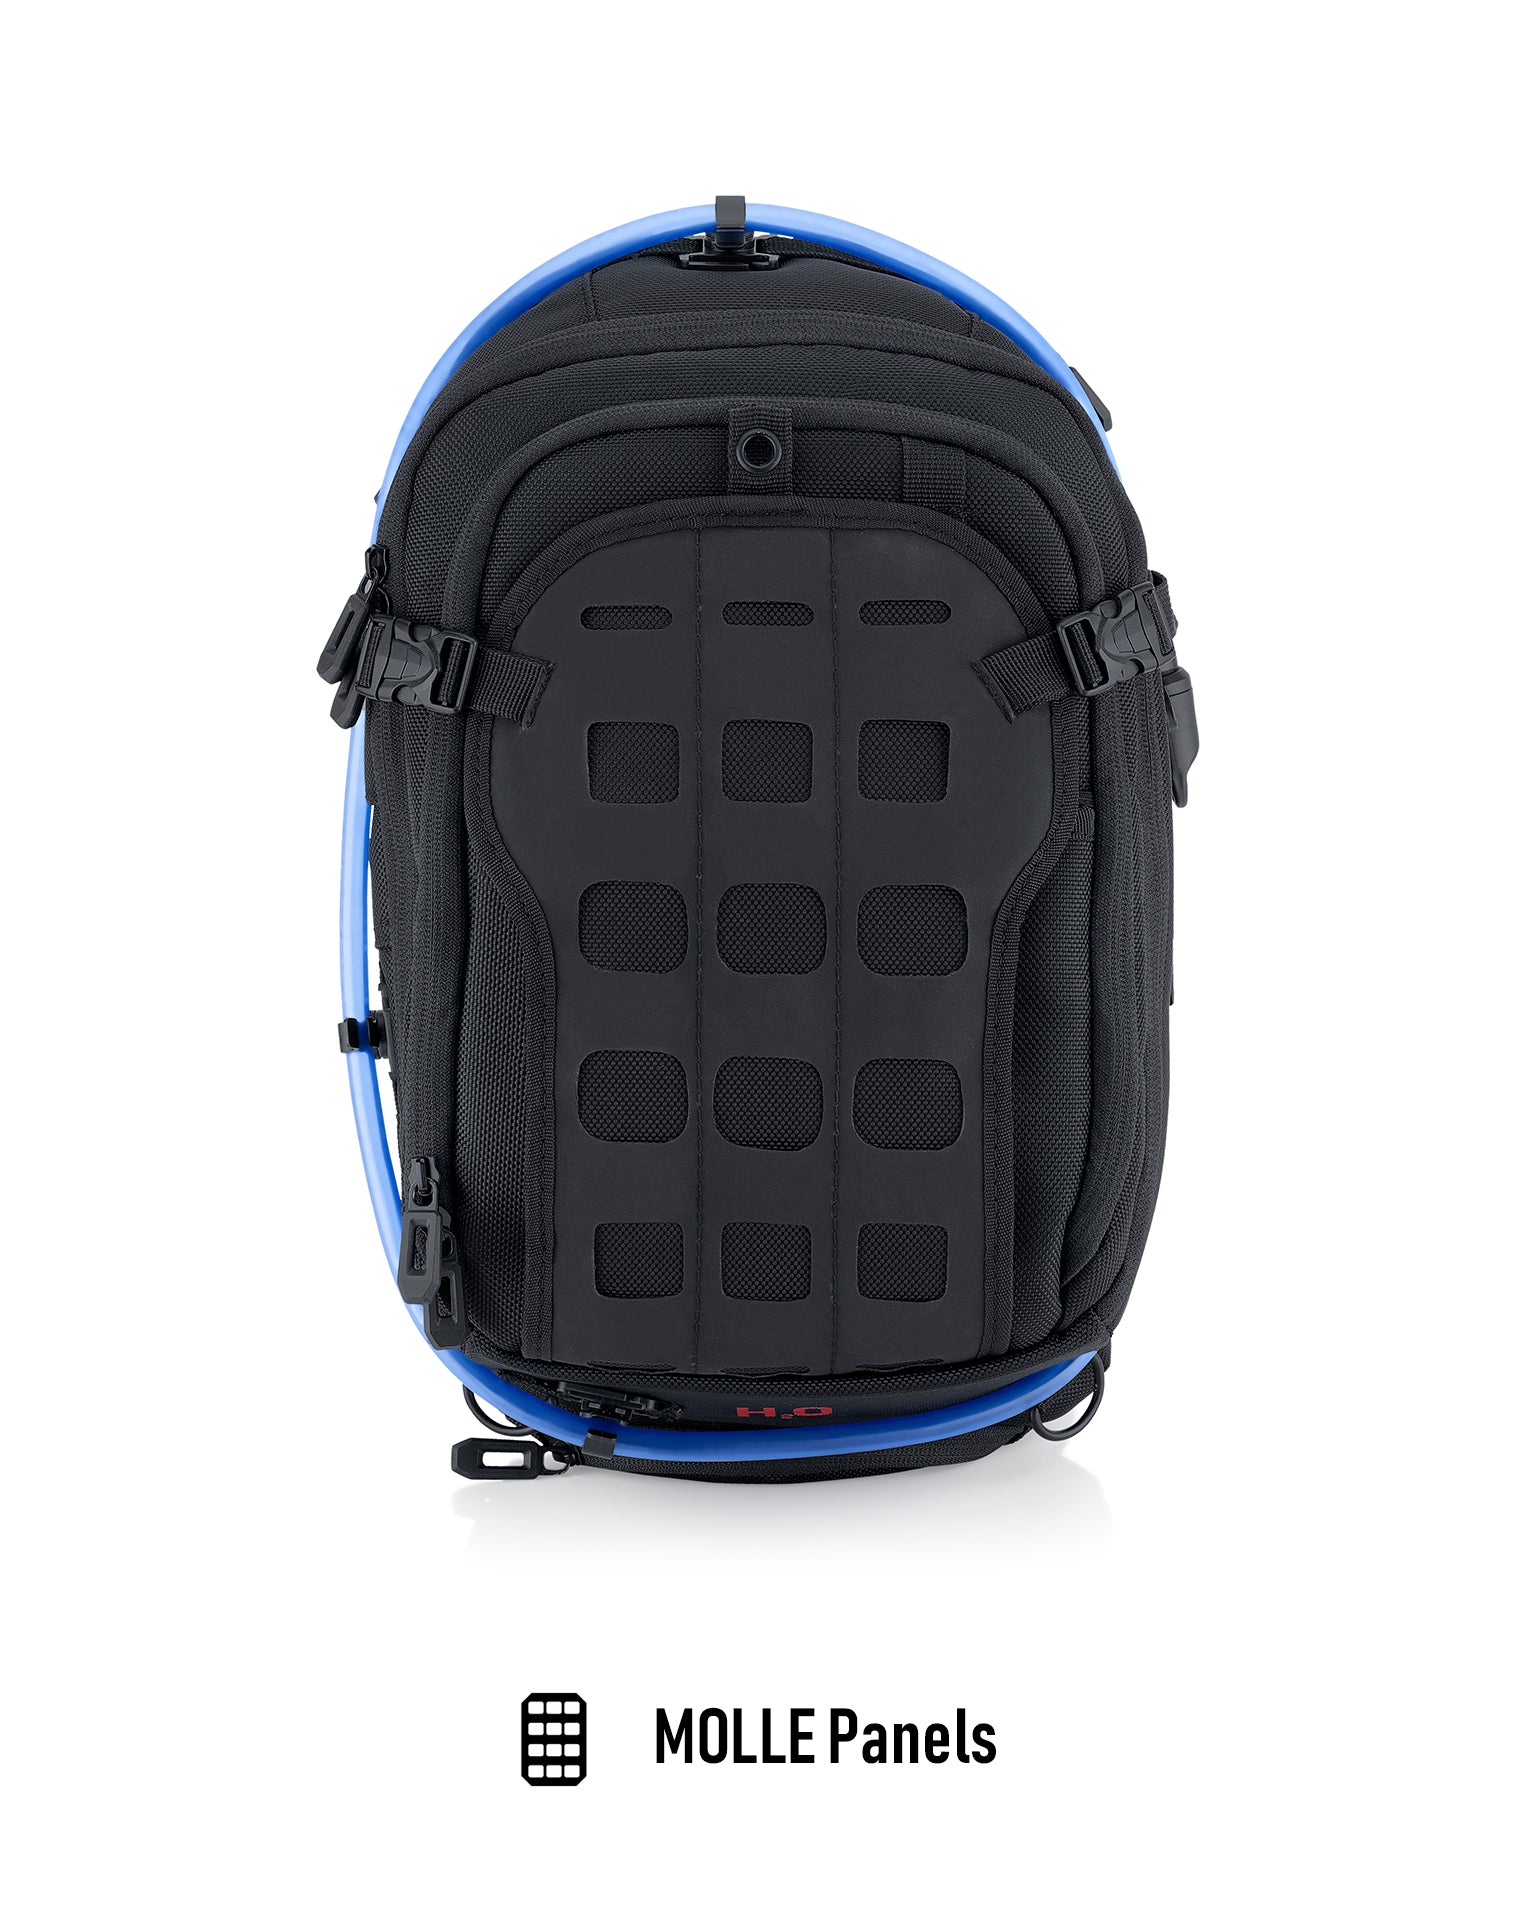 Viking Apex BMW ADV Touring Backpack with Hydration Pack